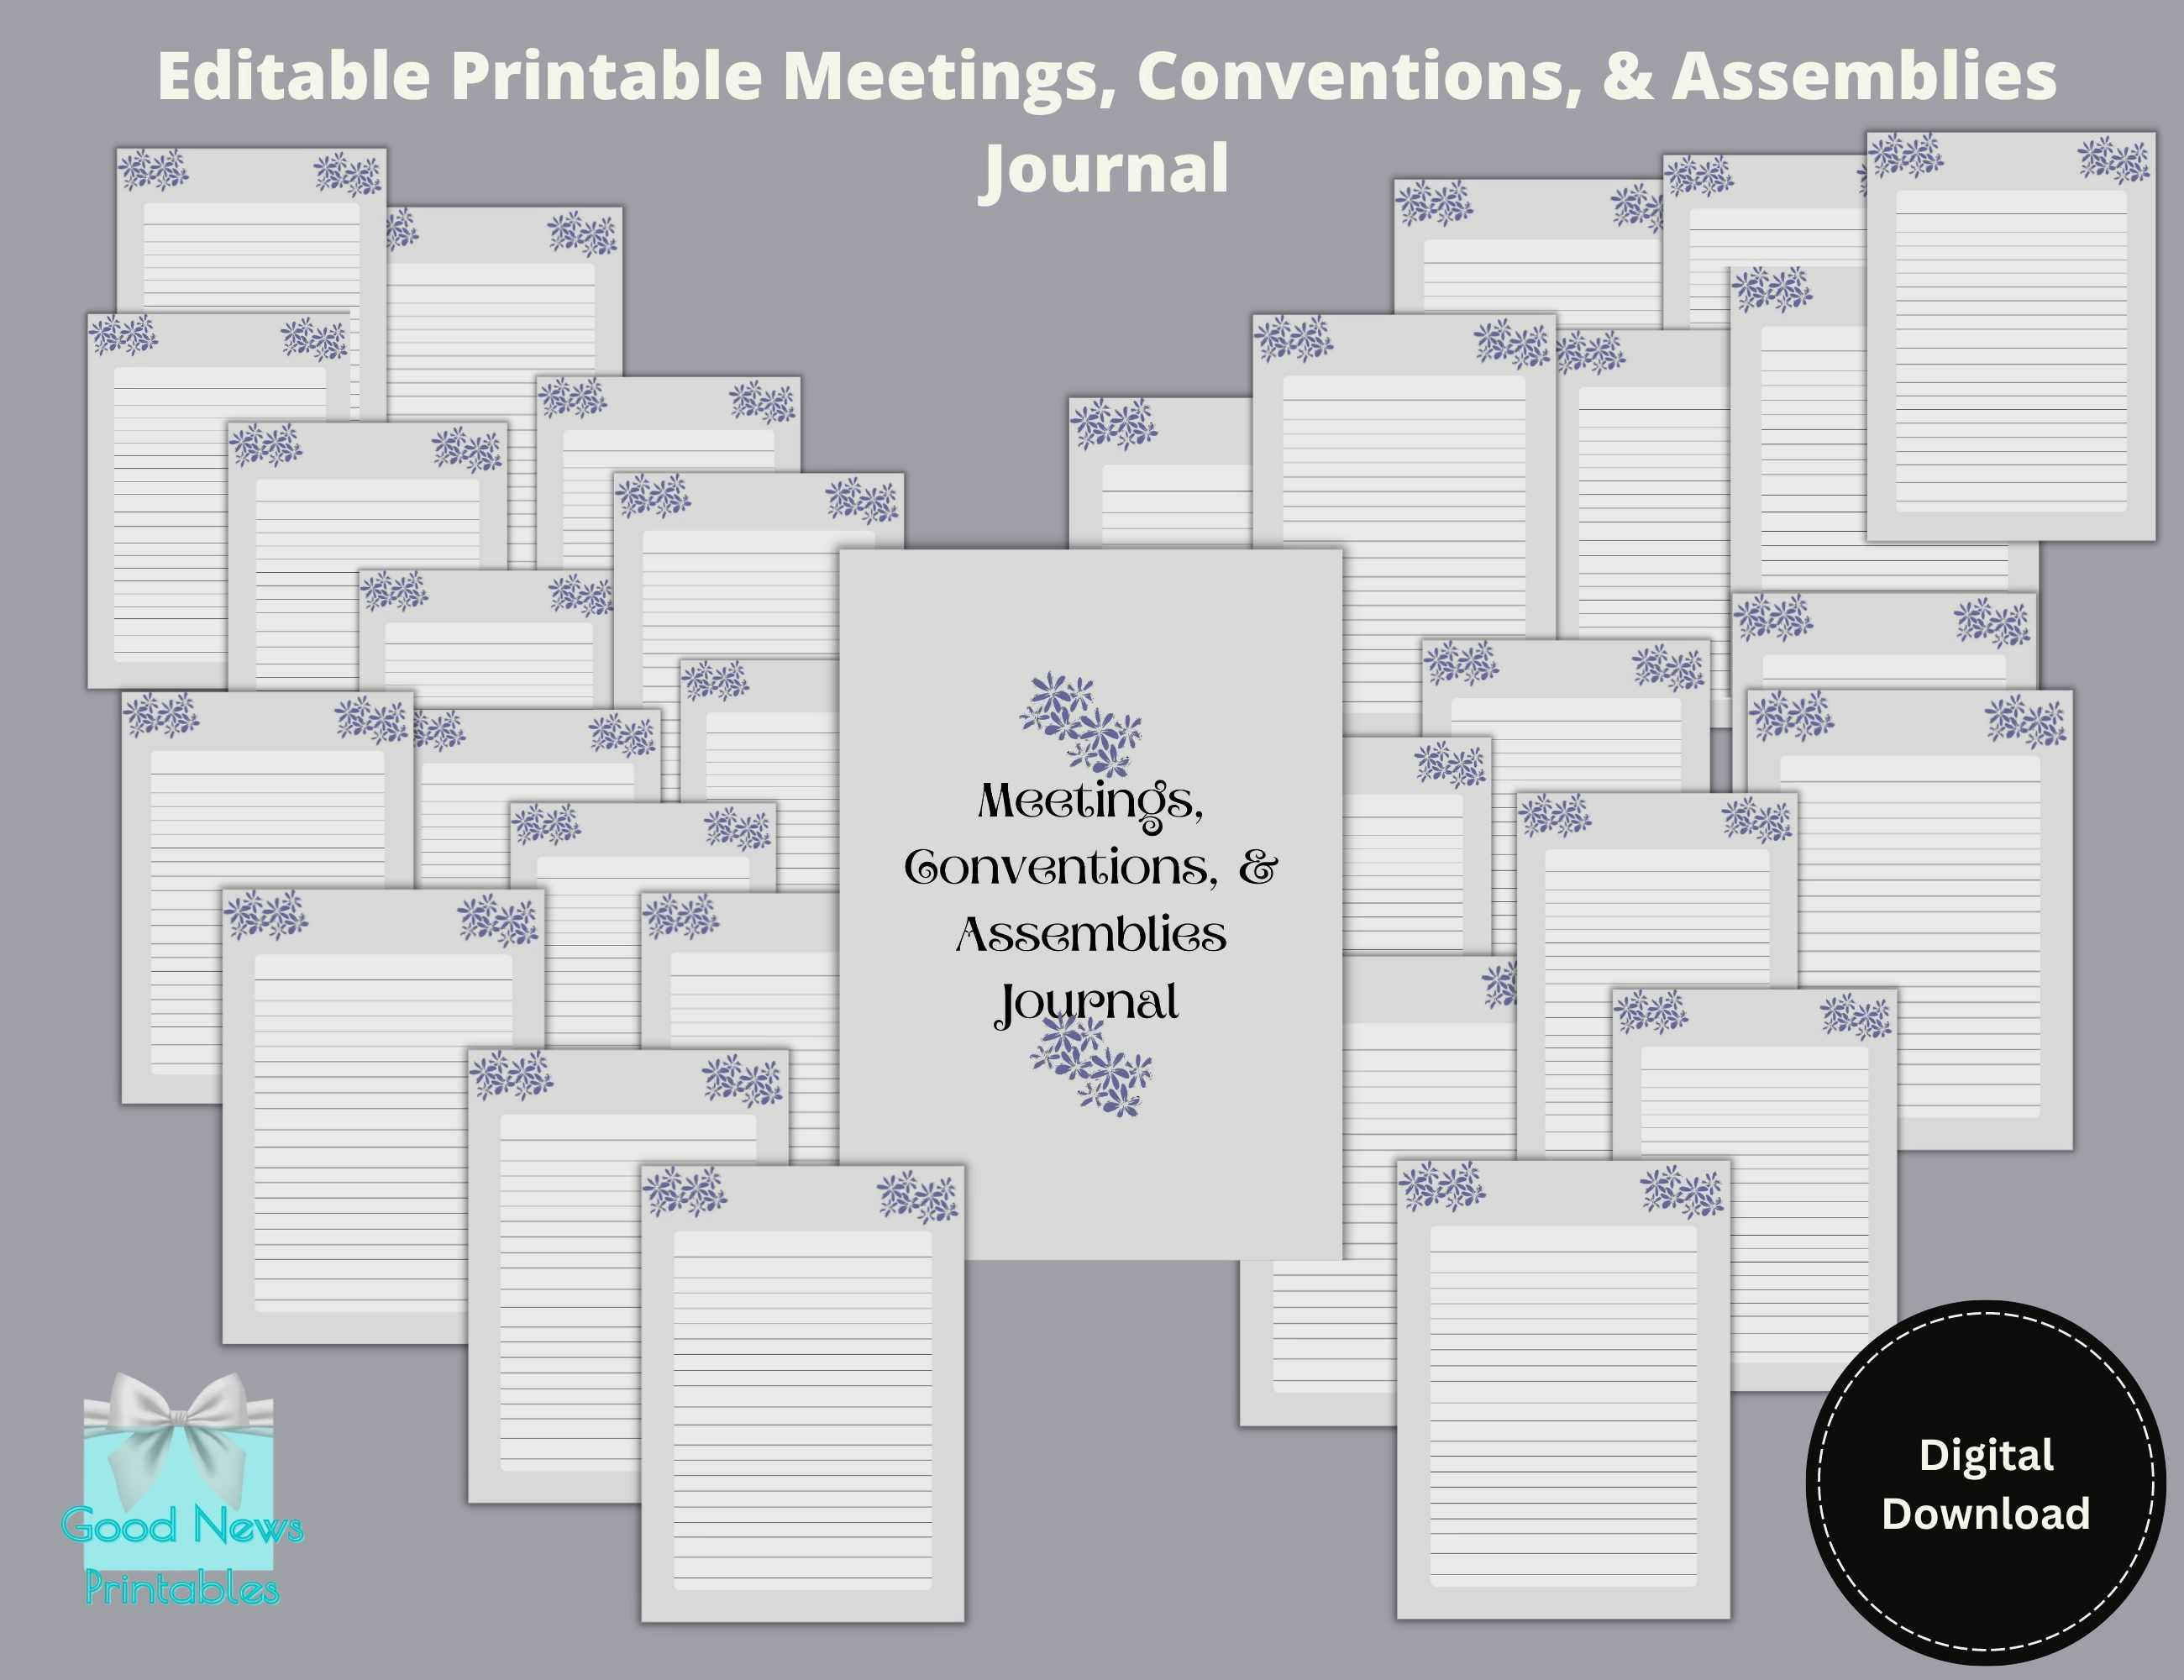 Editable Printable Meetings, Conventions, & Assemblies Journal, A4, US Letter Size